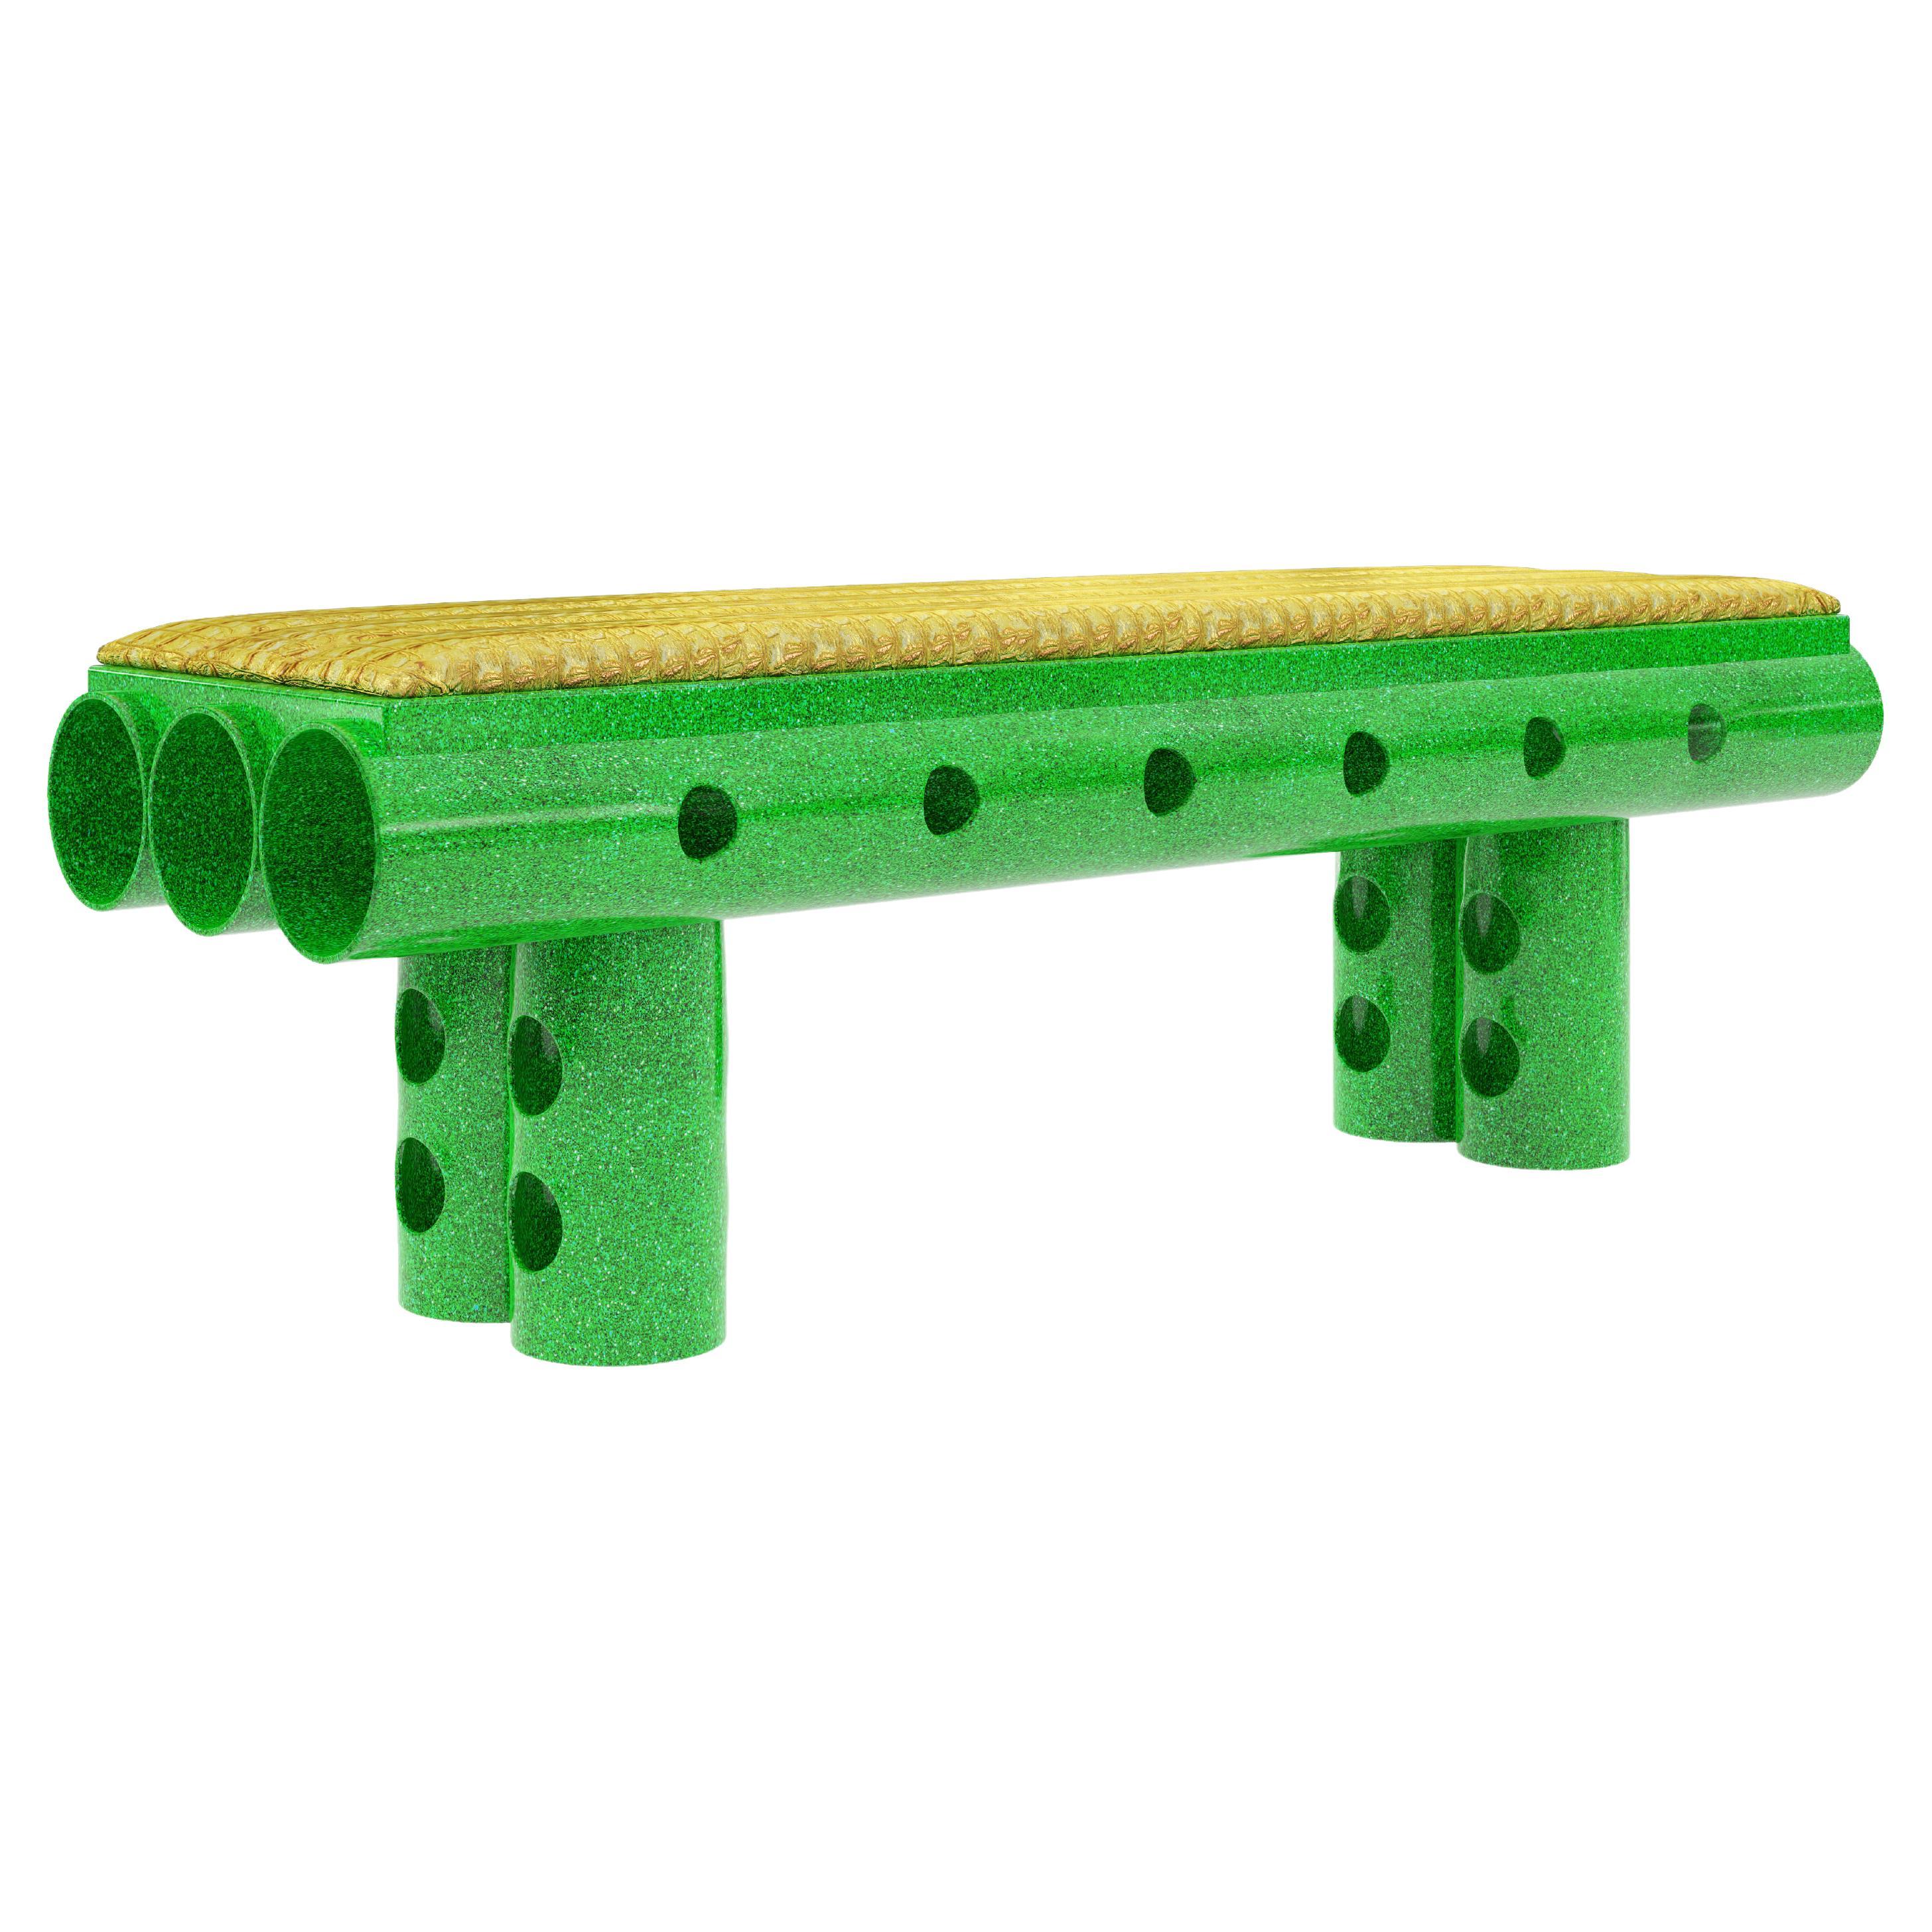 Bench In Green Metallic Paint and Gold Crocodile Leather Seat